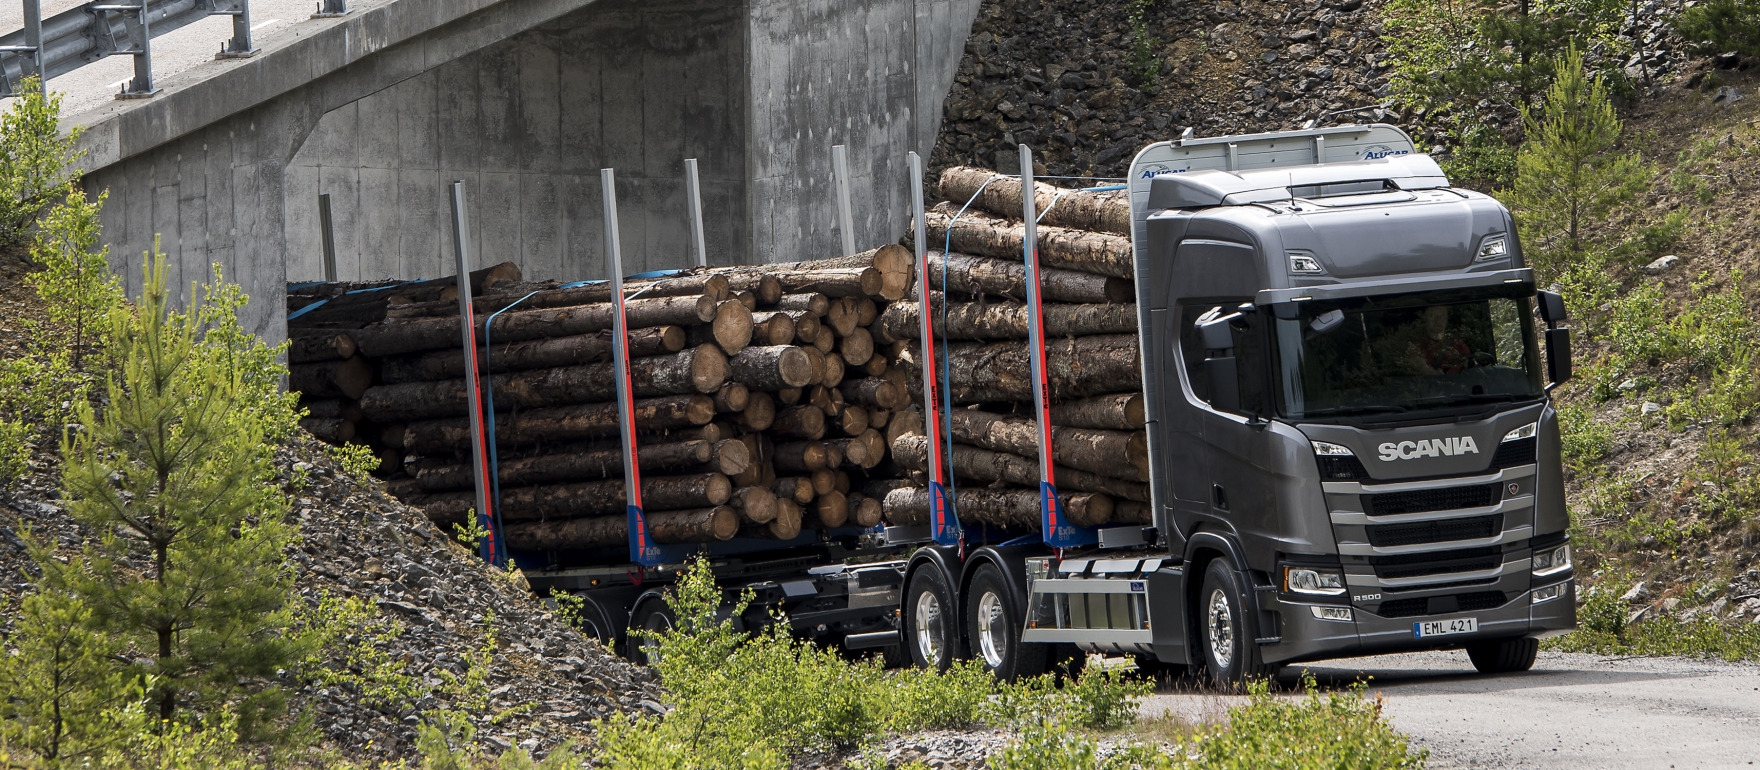 Scania Images - Scania S Logging - HD Wallpaper 